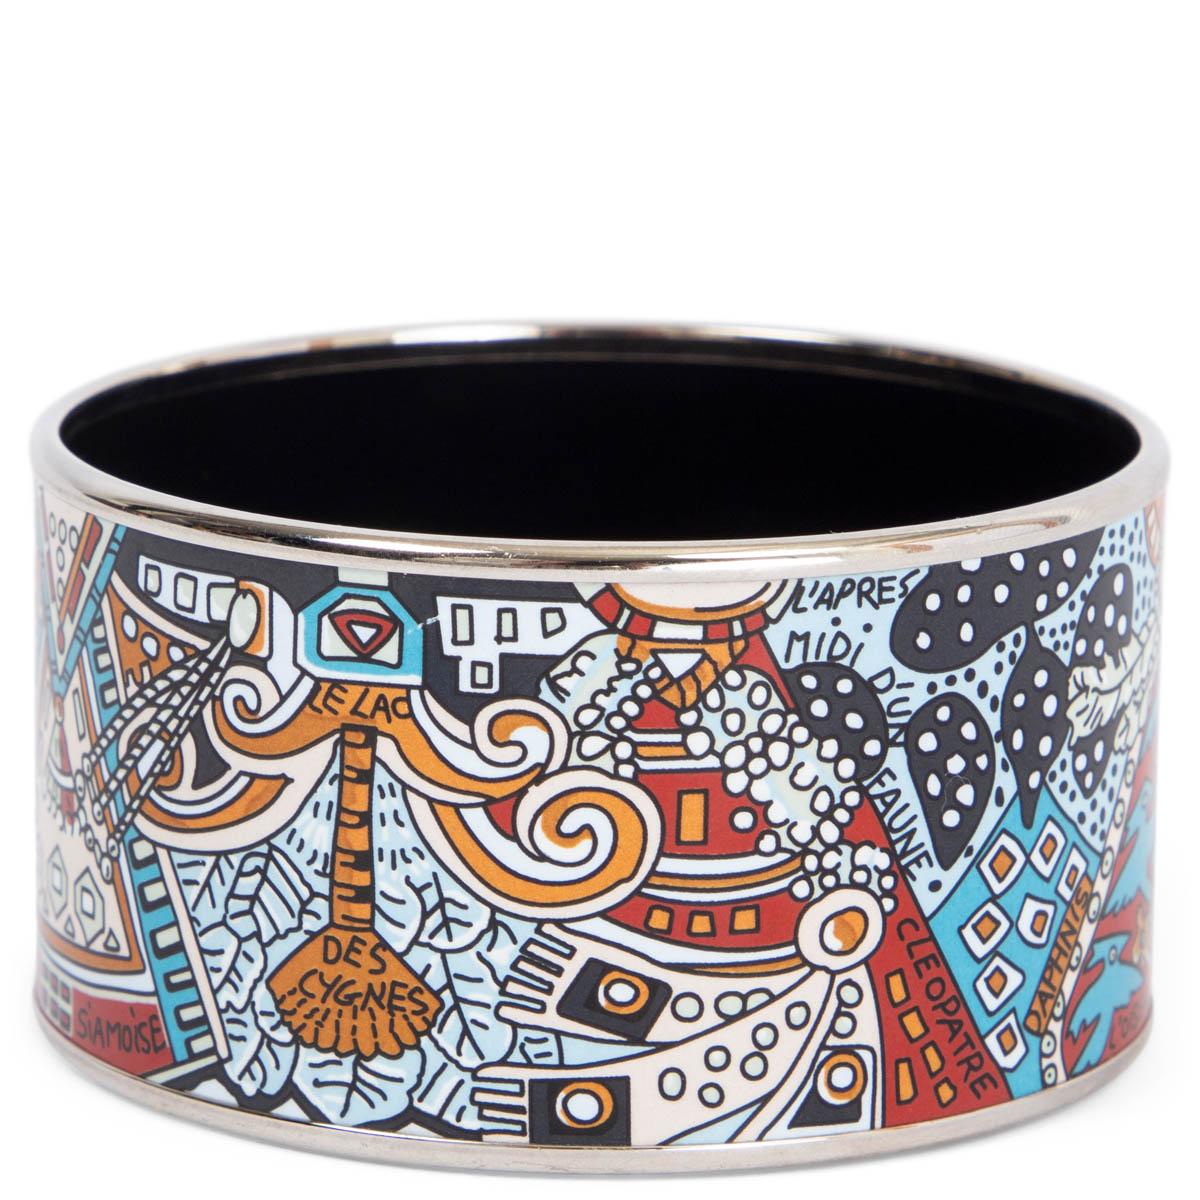 100% authentic Hermès extra wide bangle Fantaisie Orientale in multicolor enamel and silver-tone metal. Has been worn and is in excellent condition. 

Measurements
Tag Size	L
Size	L
Width	3.5cm (1.4in)
Circumference	19cm